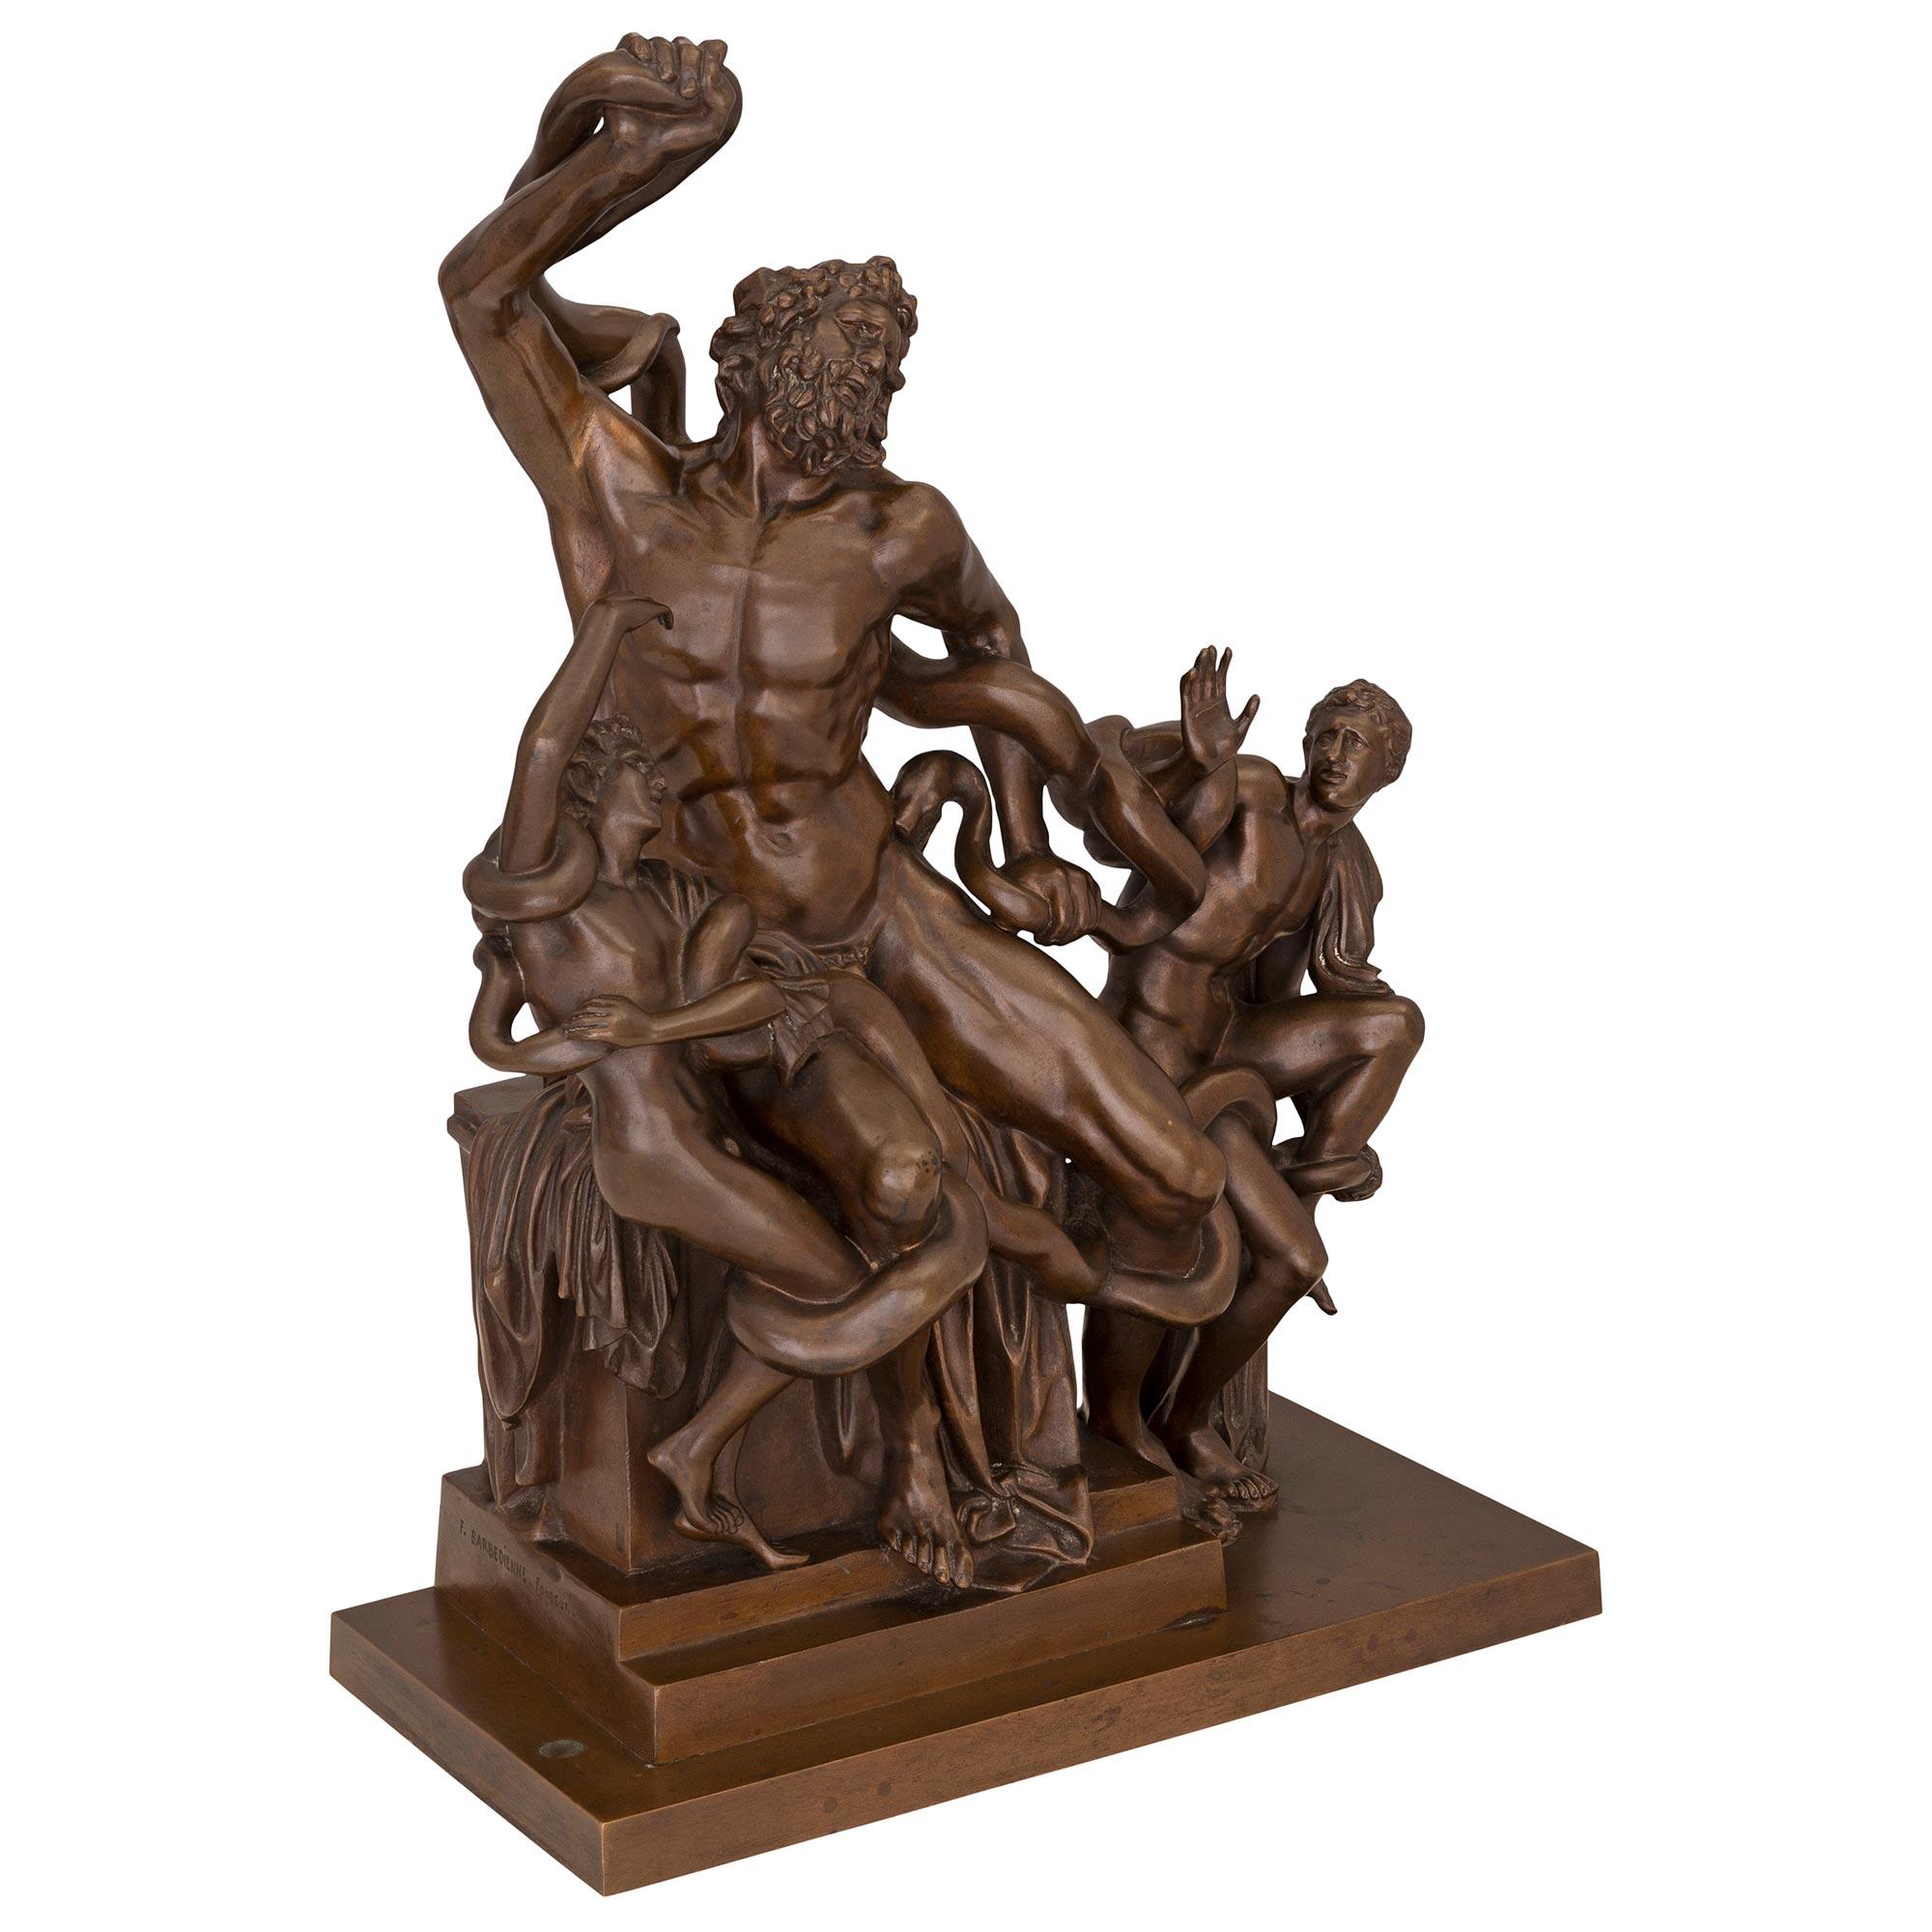 A most impressive and high quality French 19th century patinated bronze statue of Laocoön and his sons, signed Barbedienne. The bronze is raised by a rectangular base below a stepped pedestal support. At the center is the handsome and richly chased